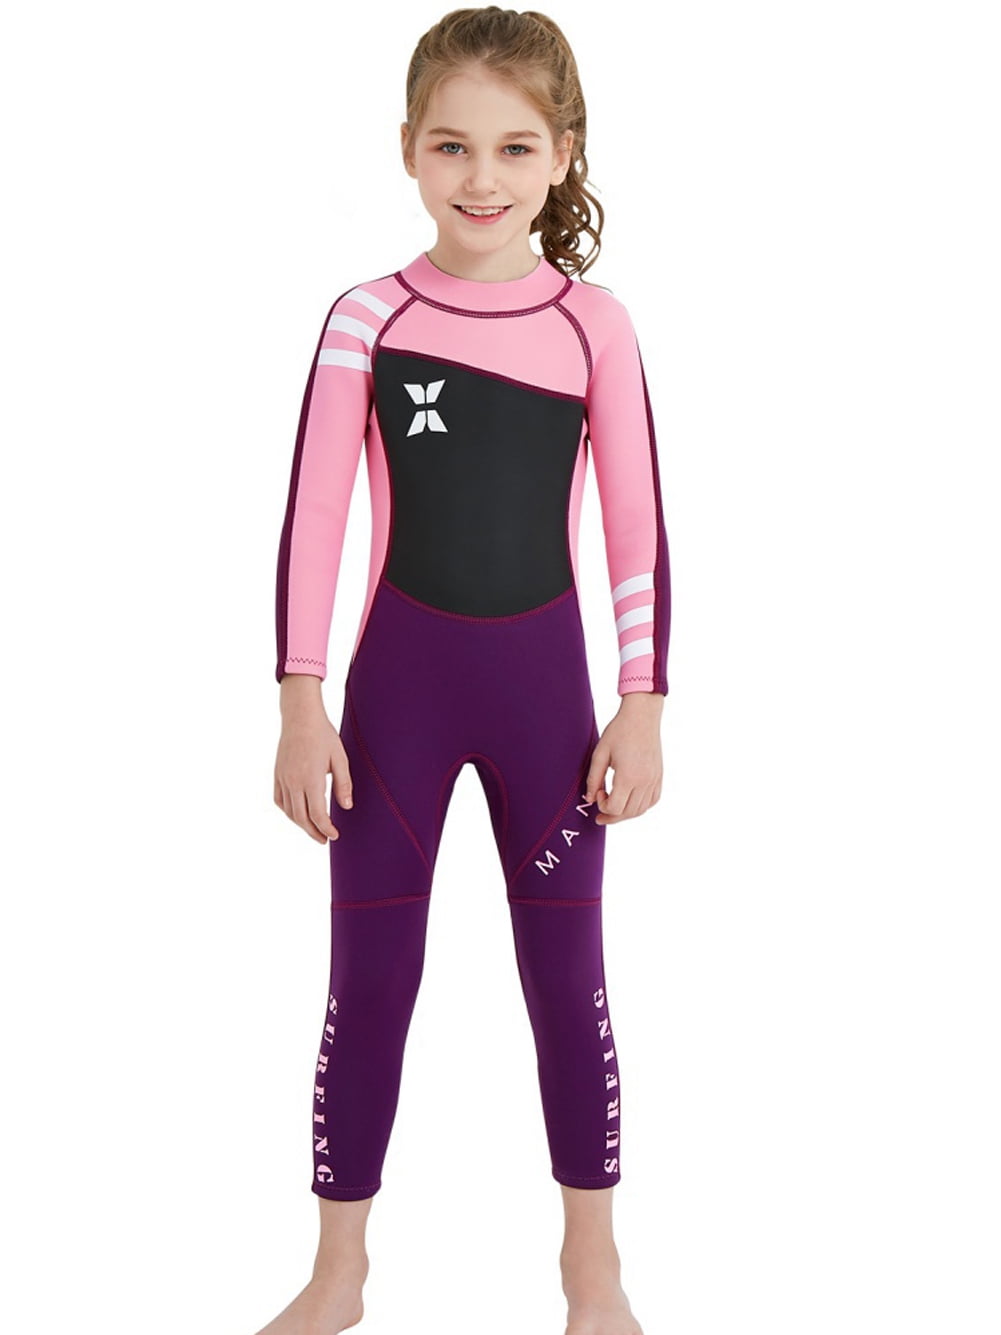 Kids Wetsuits Full Body Toddler Wetsuit Play Move 2 Change Full Length Wetsuit Kids 3mm Neoprene Suit Sun Safe Thermal Baby Swimsuit Boy Kids Wetsuit for Boys & Girls Swim Baby Wetsuit Surf